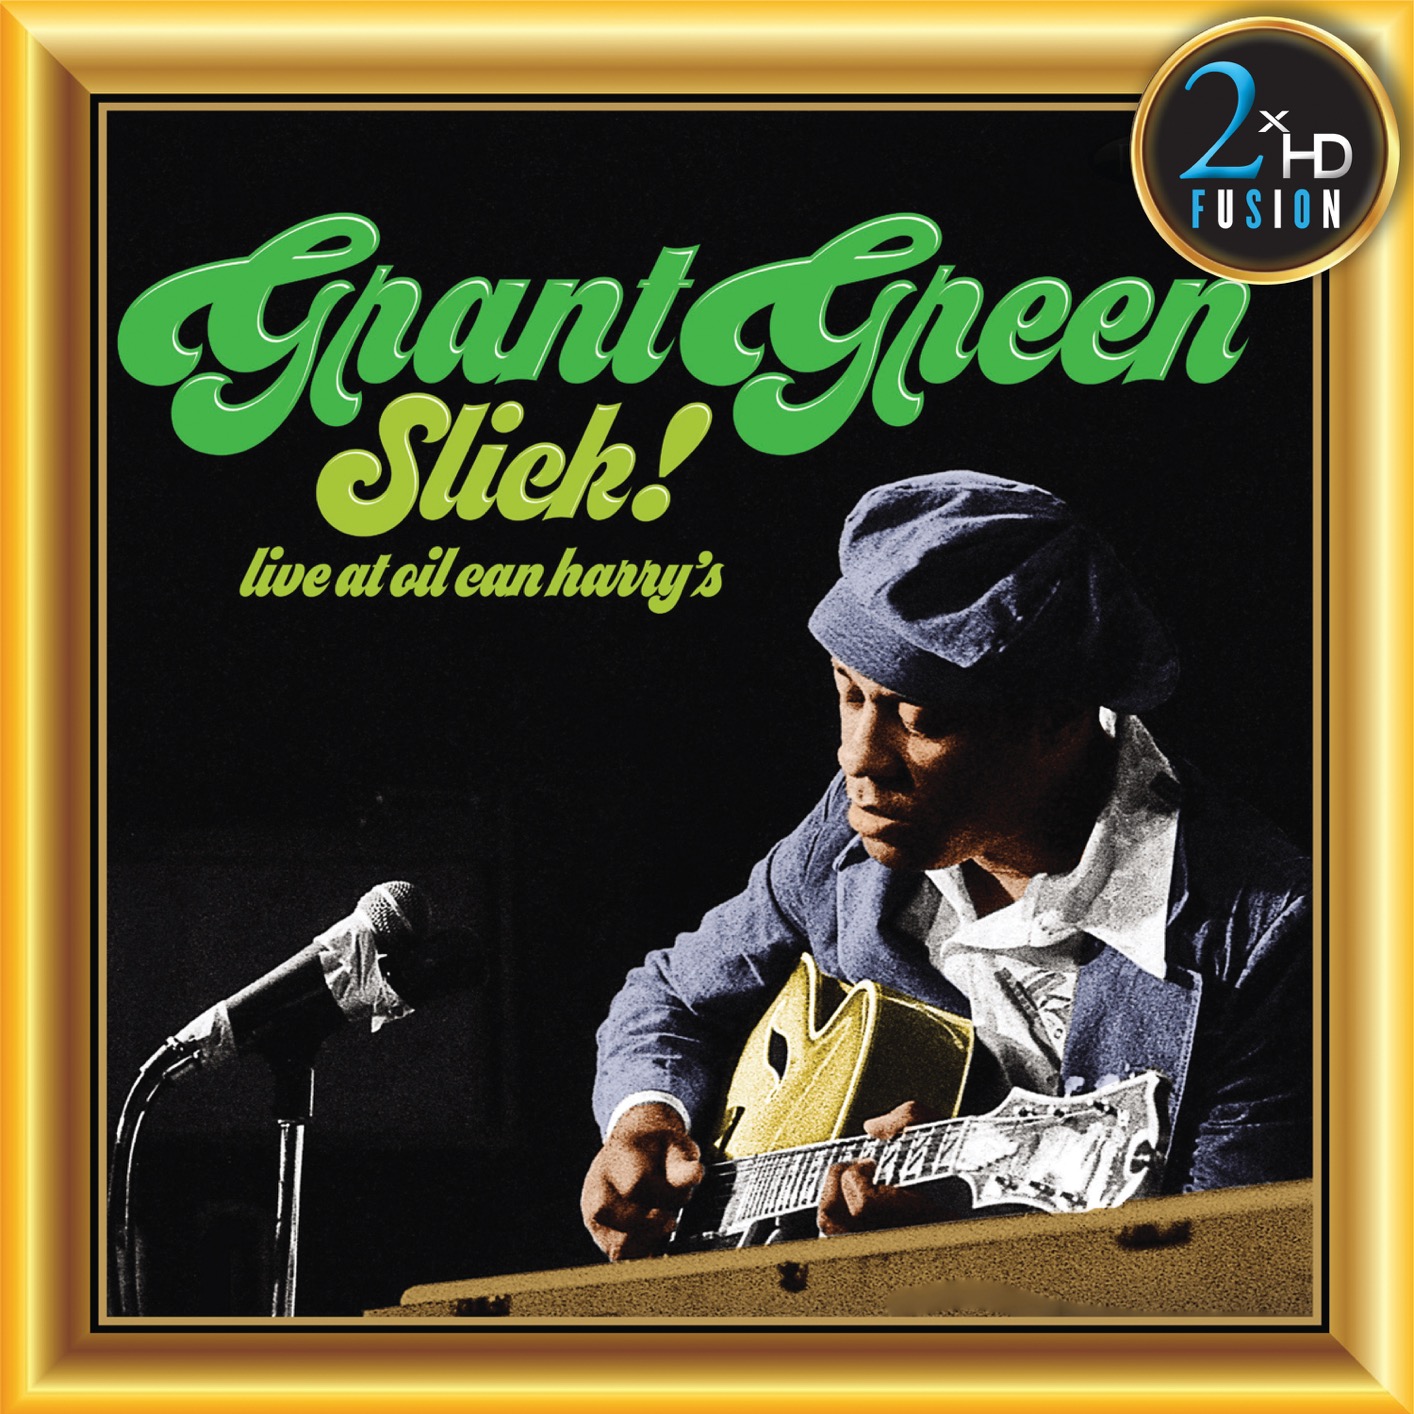 Grant Green - Grant Green, Slick! Live at Oil Can Harry’s (Remastered) (2019) [FLAC 24bit/192kHz]